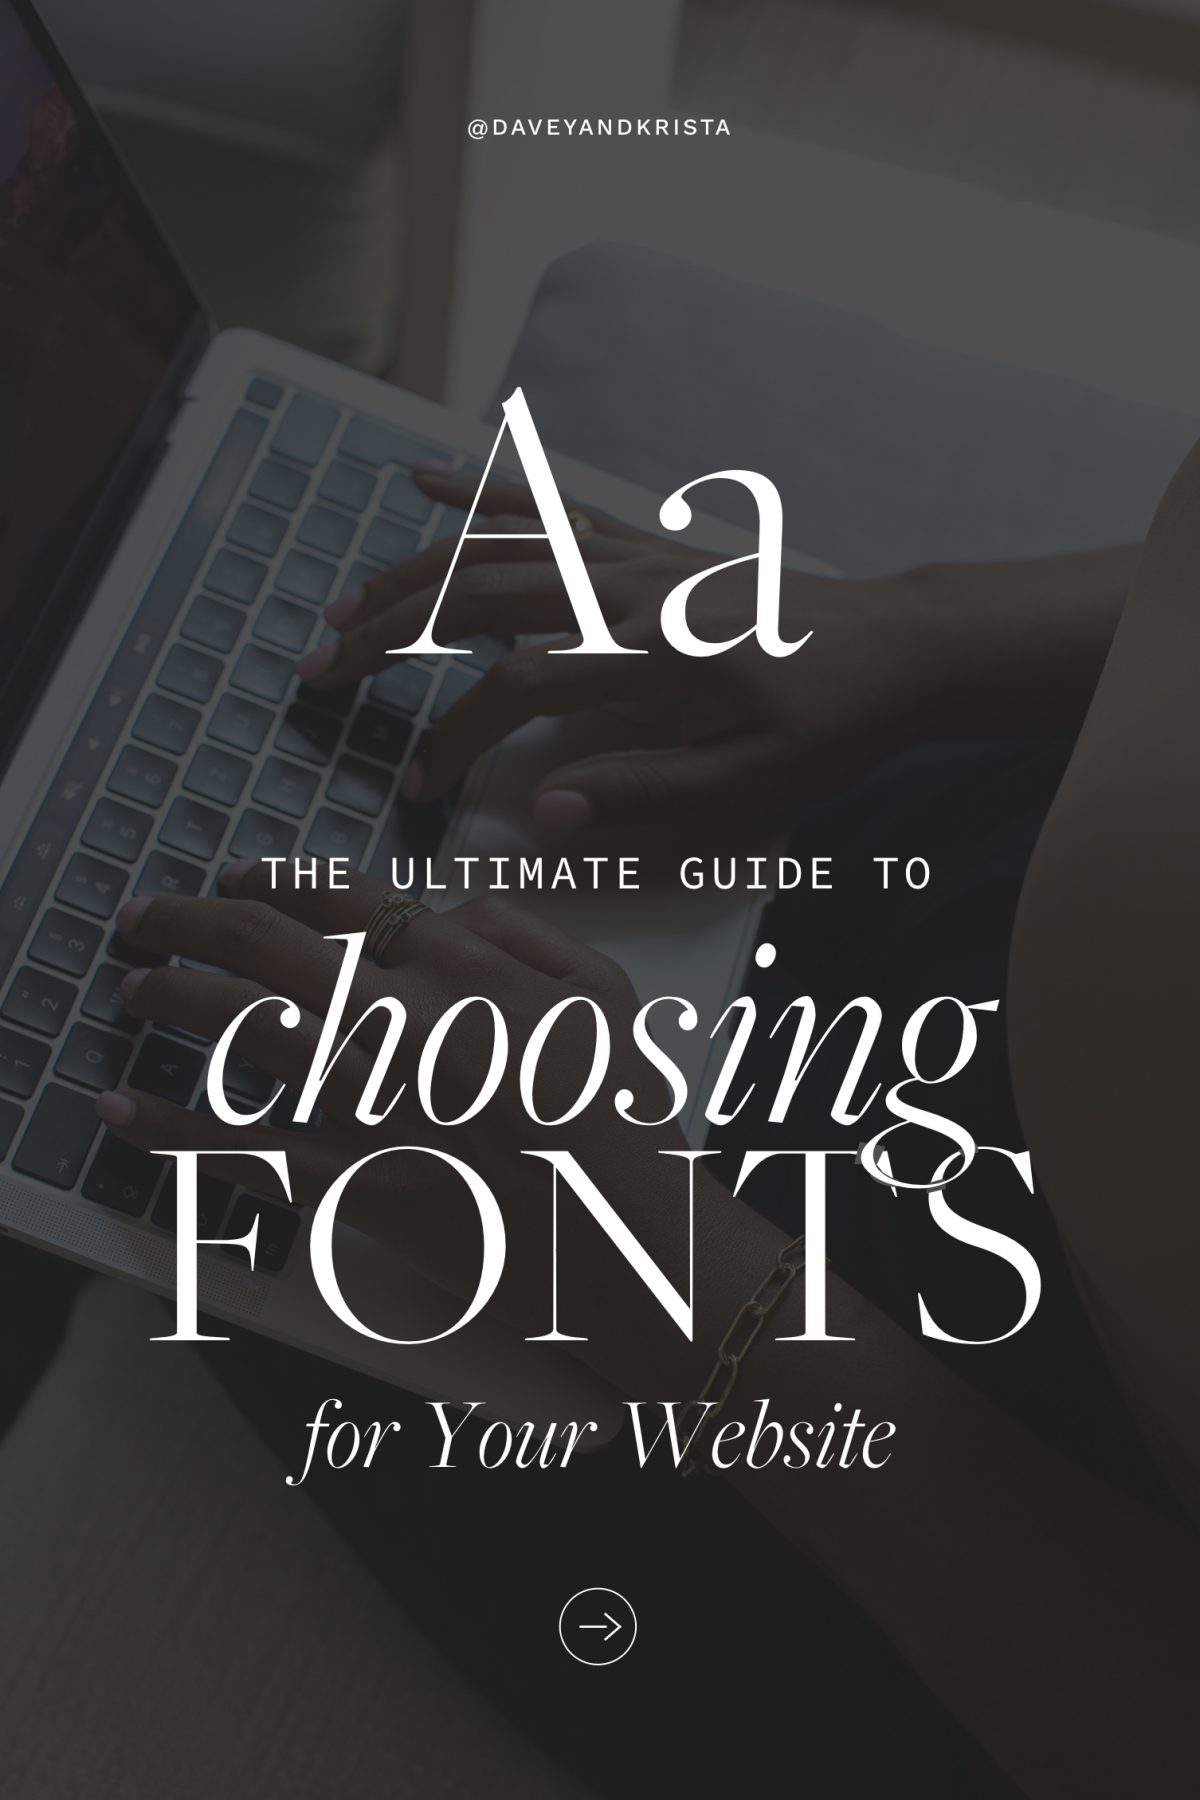 The Ultimate Guide to Choosing Fonts for Your Website